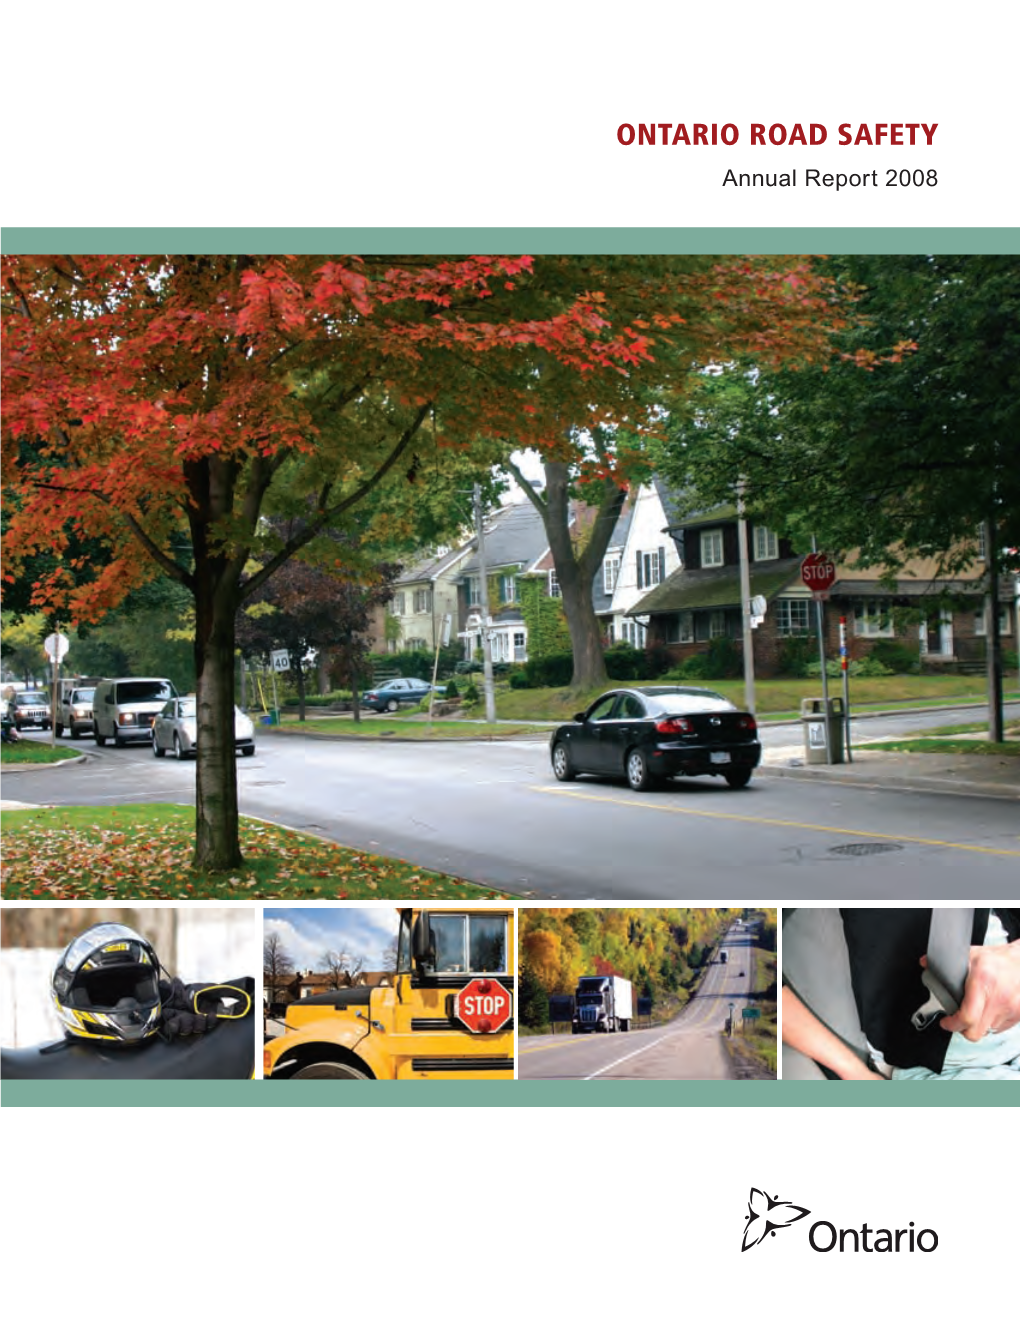 Ontario Road Safety Annual Report 2008 Ontario Road Safety Annual Report 2008